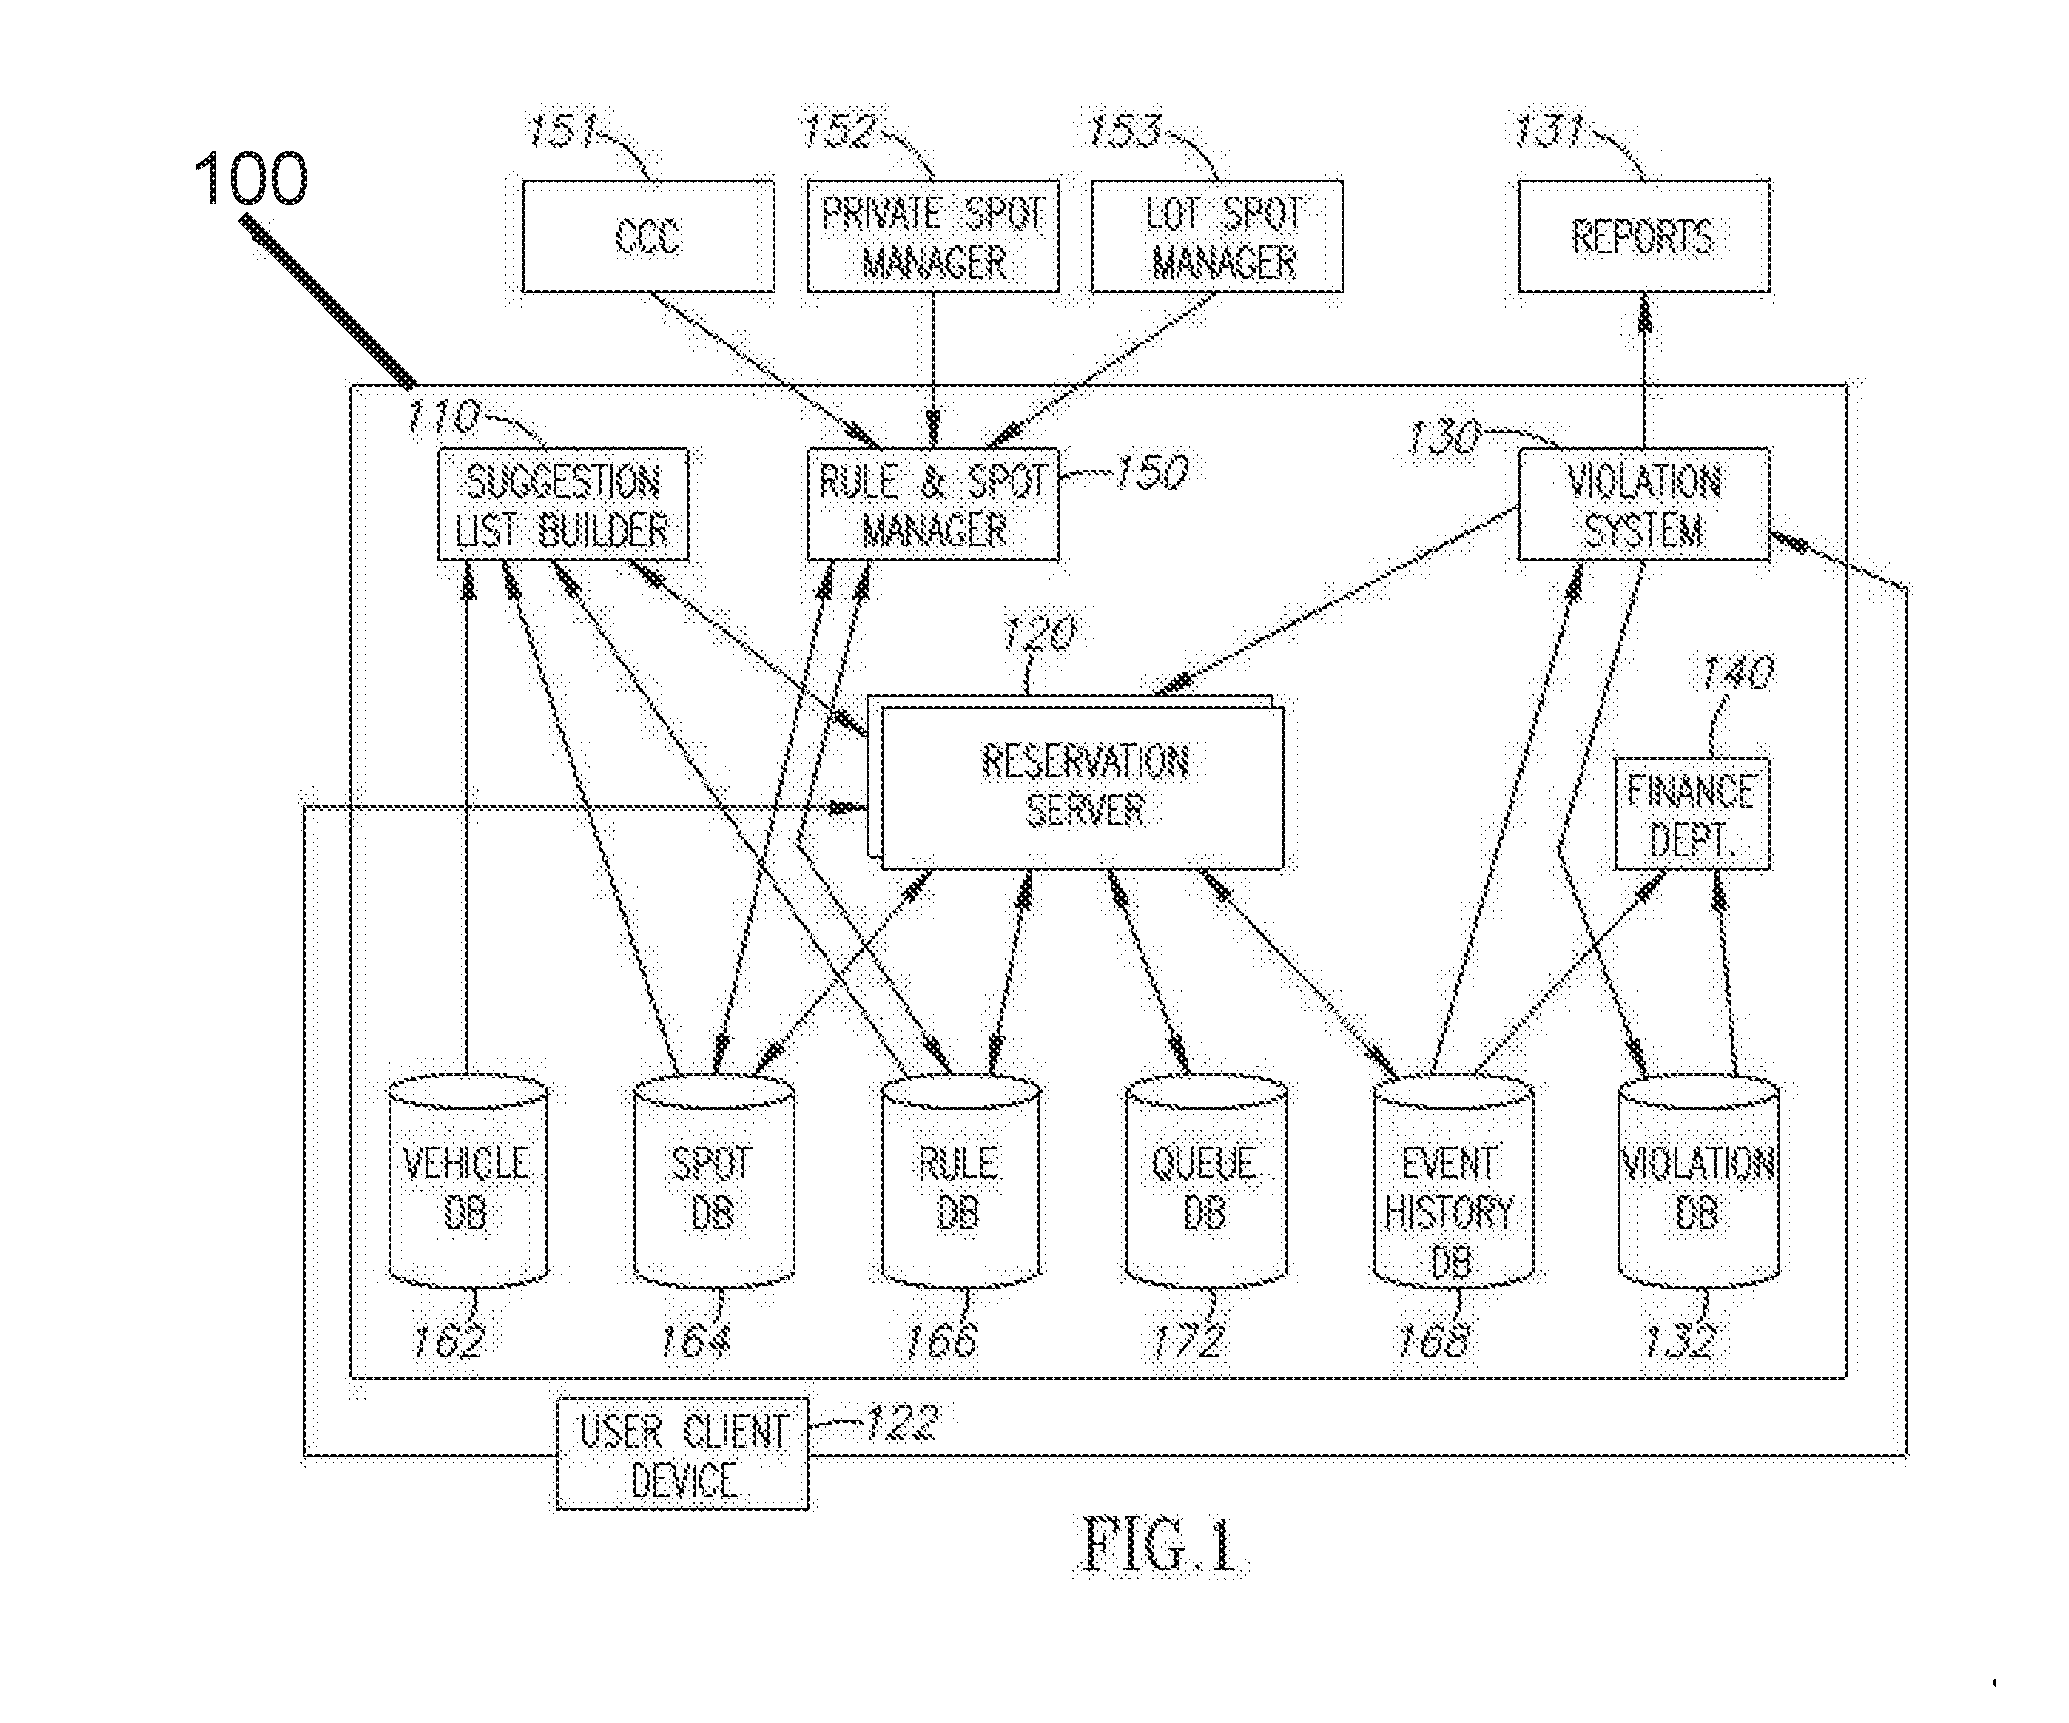 Citywide parking system and method